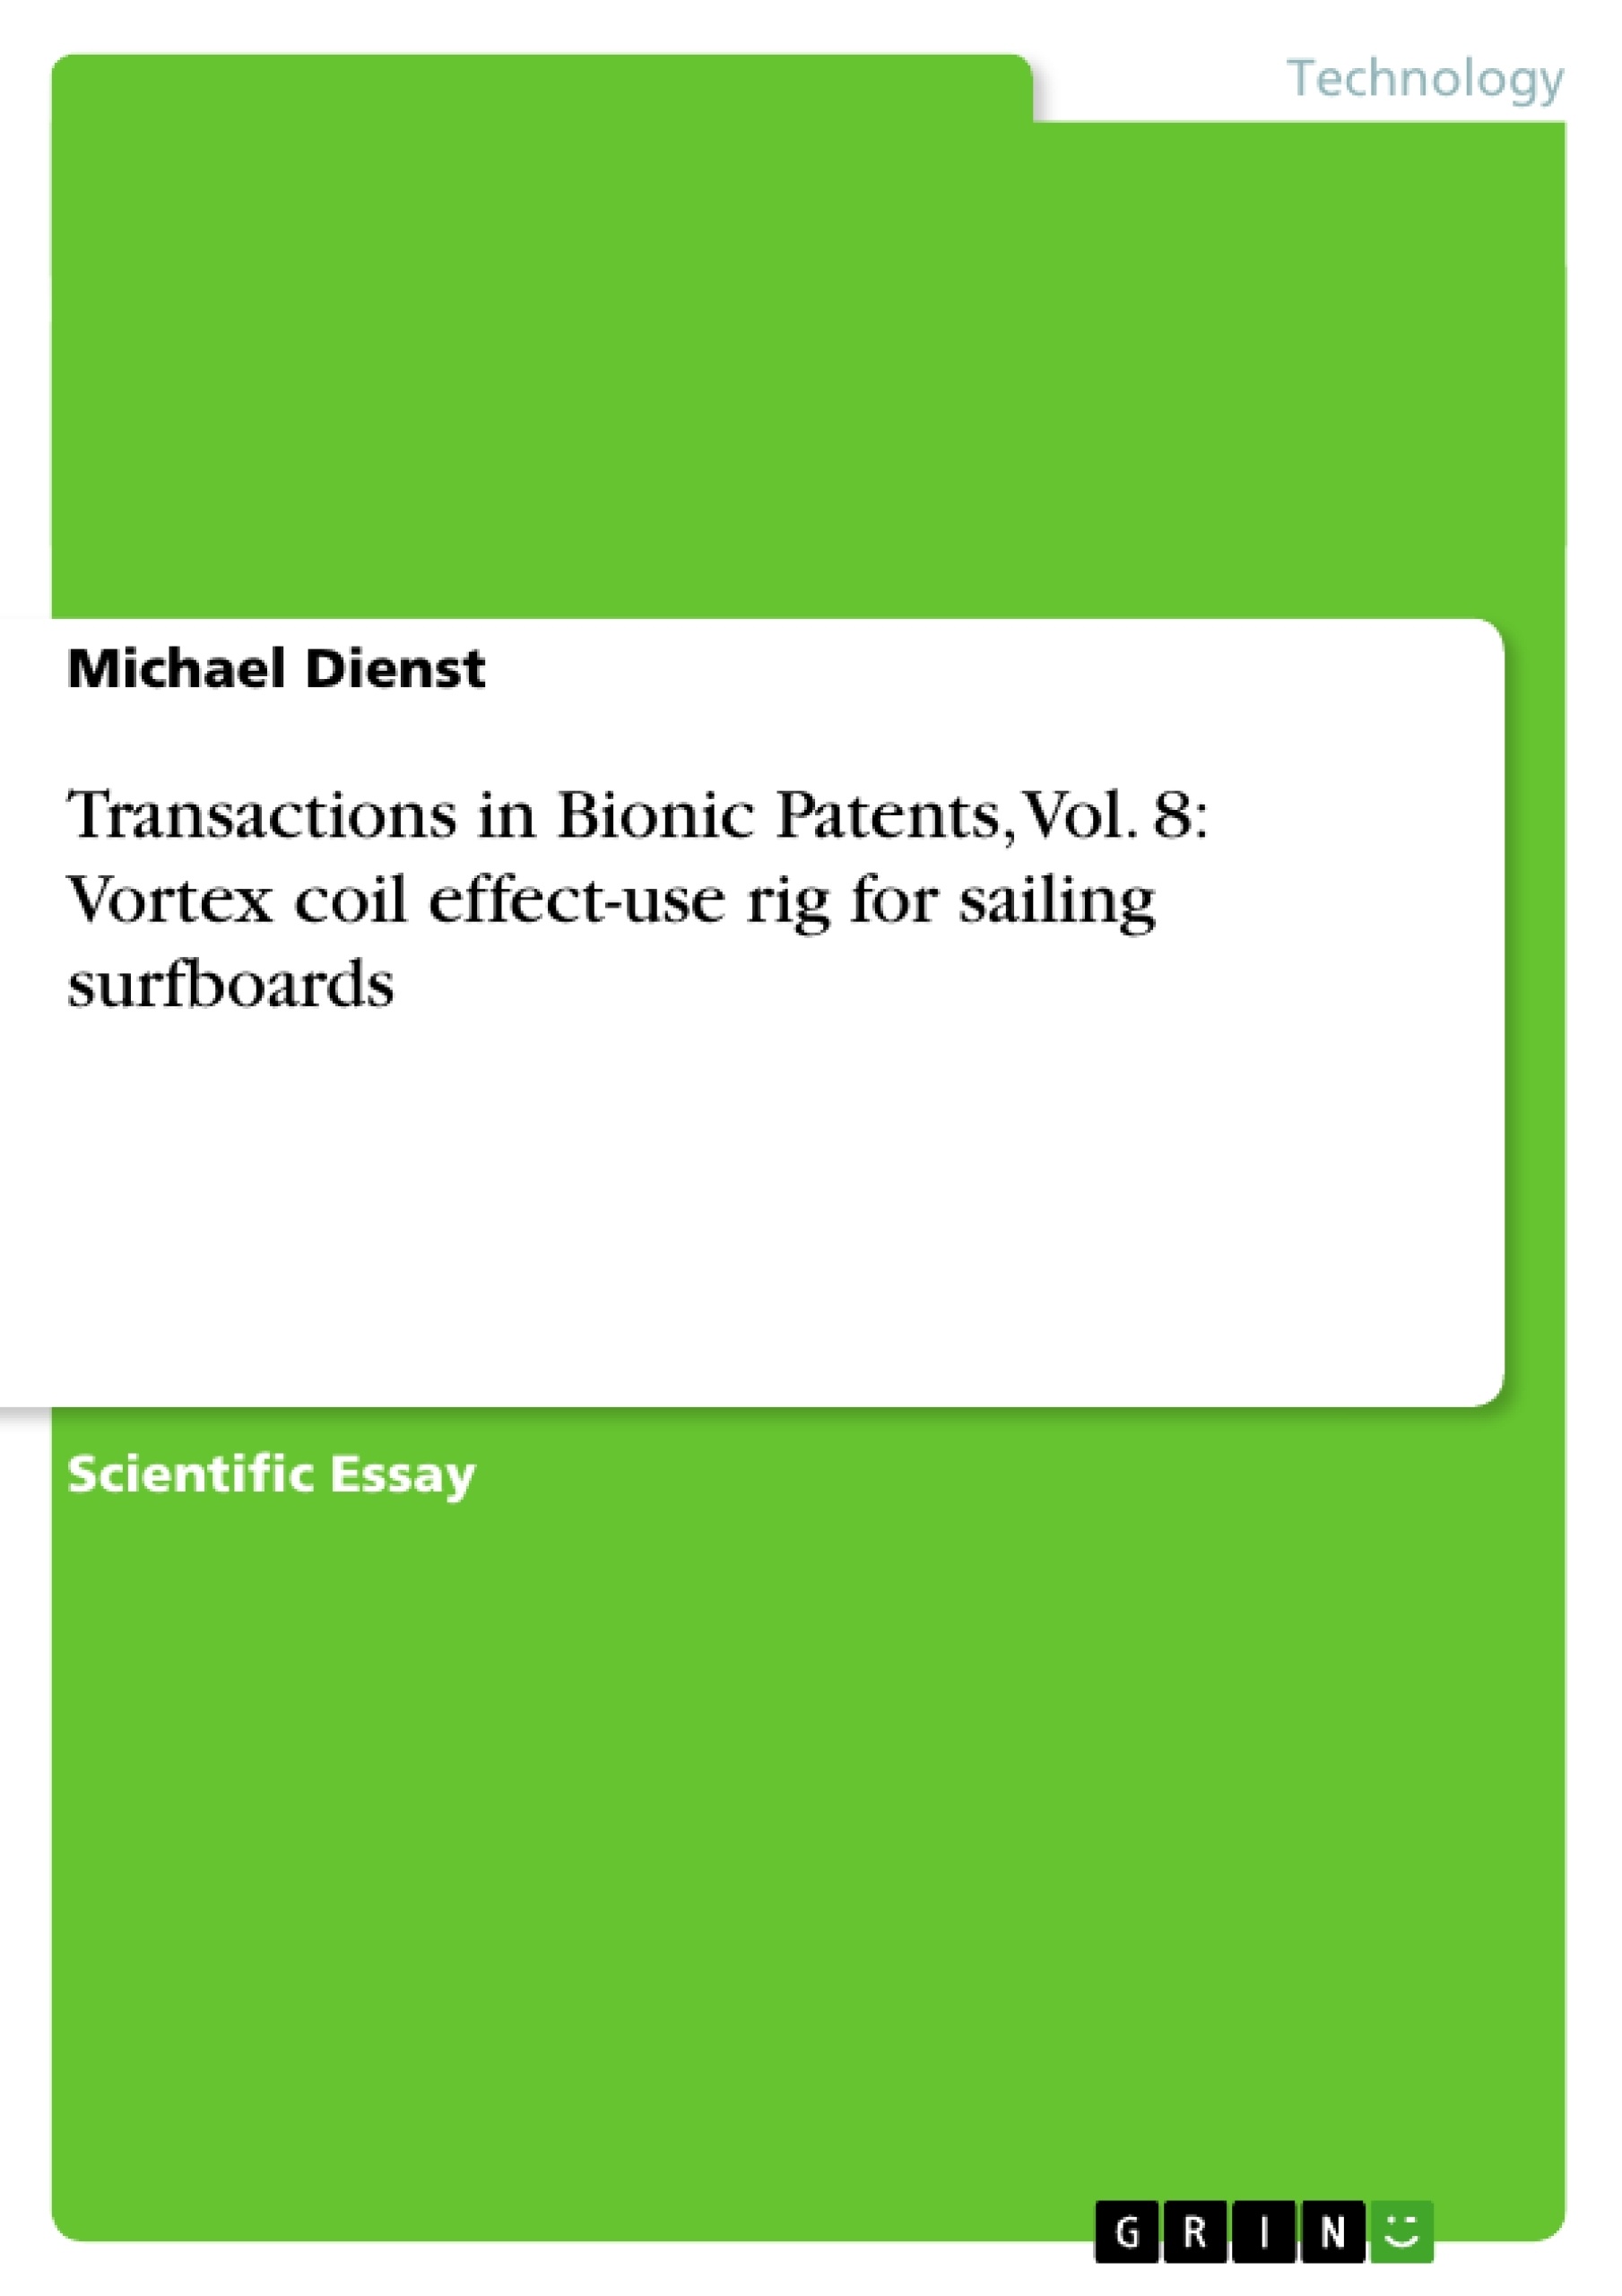 Title: Transactions in Bionic Patents, Vol. 8: Vortex coil effect-use rig for sailing surfboards